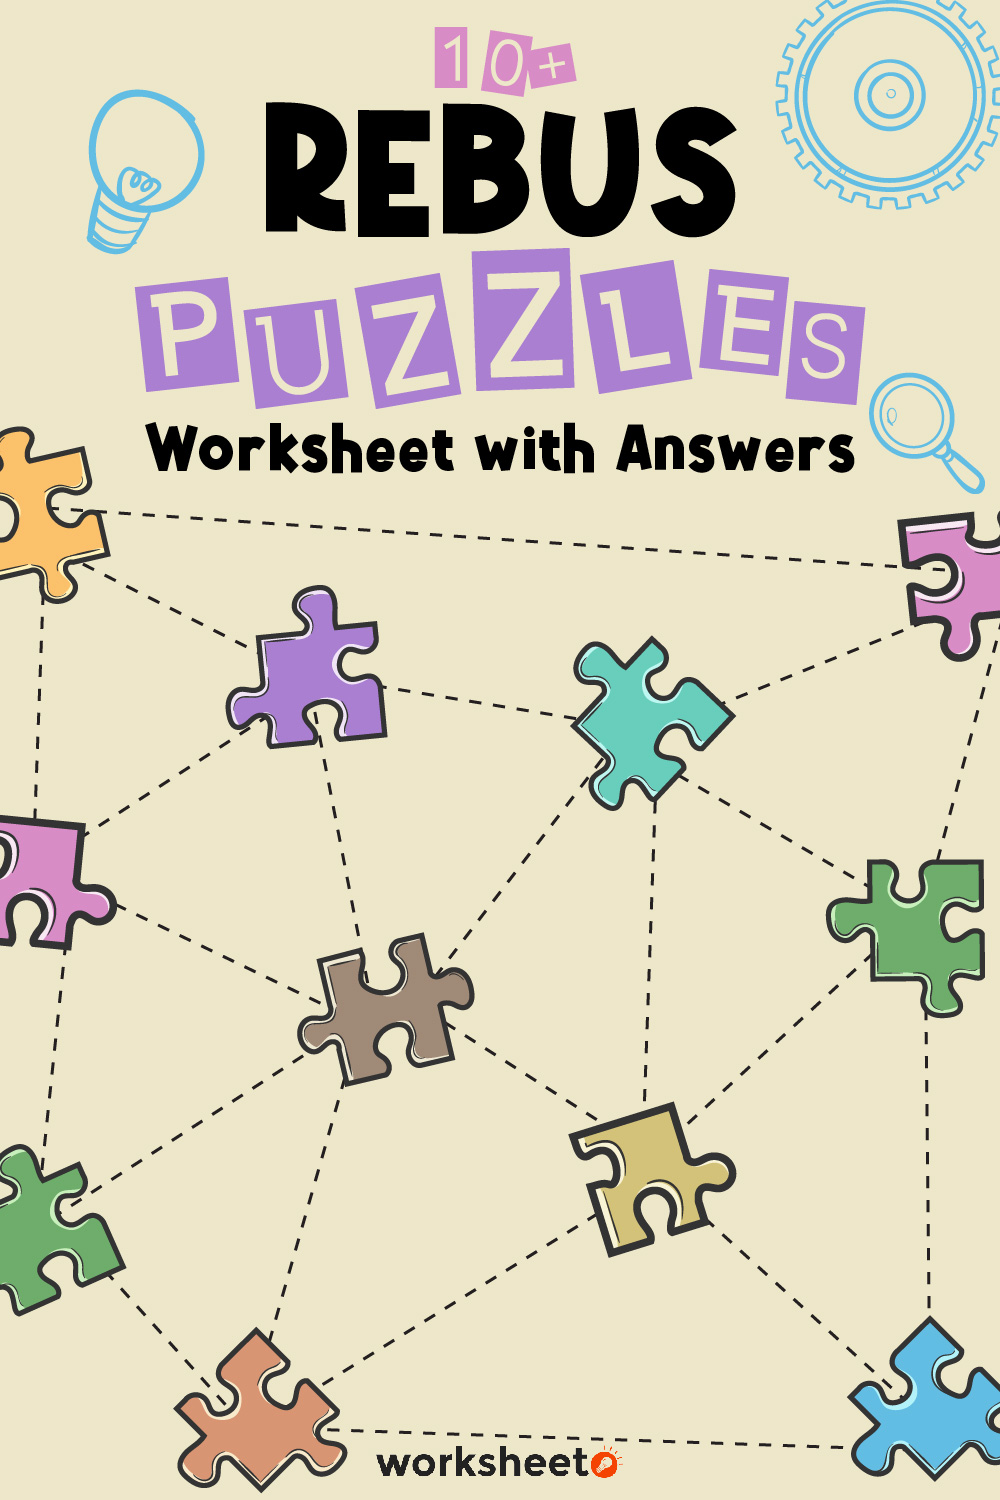 Rebus Puzzles Worksheet with Answers